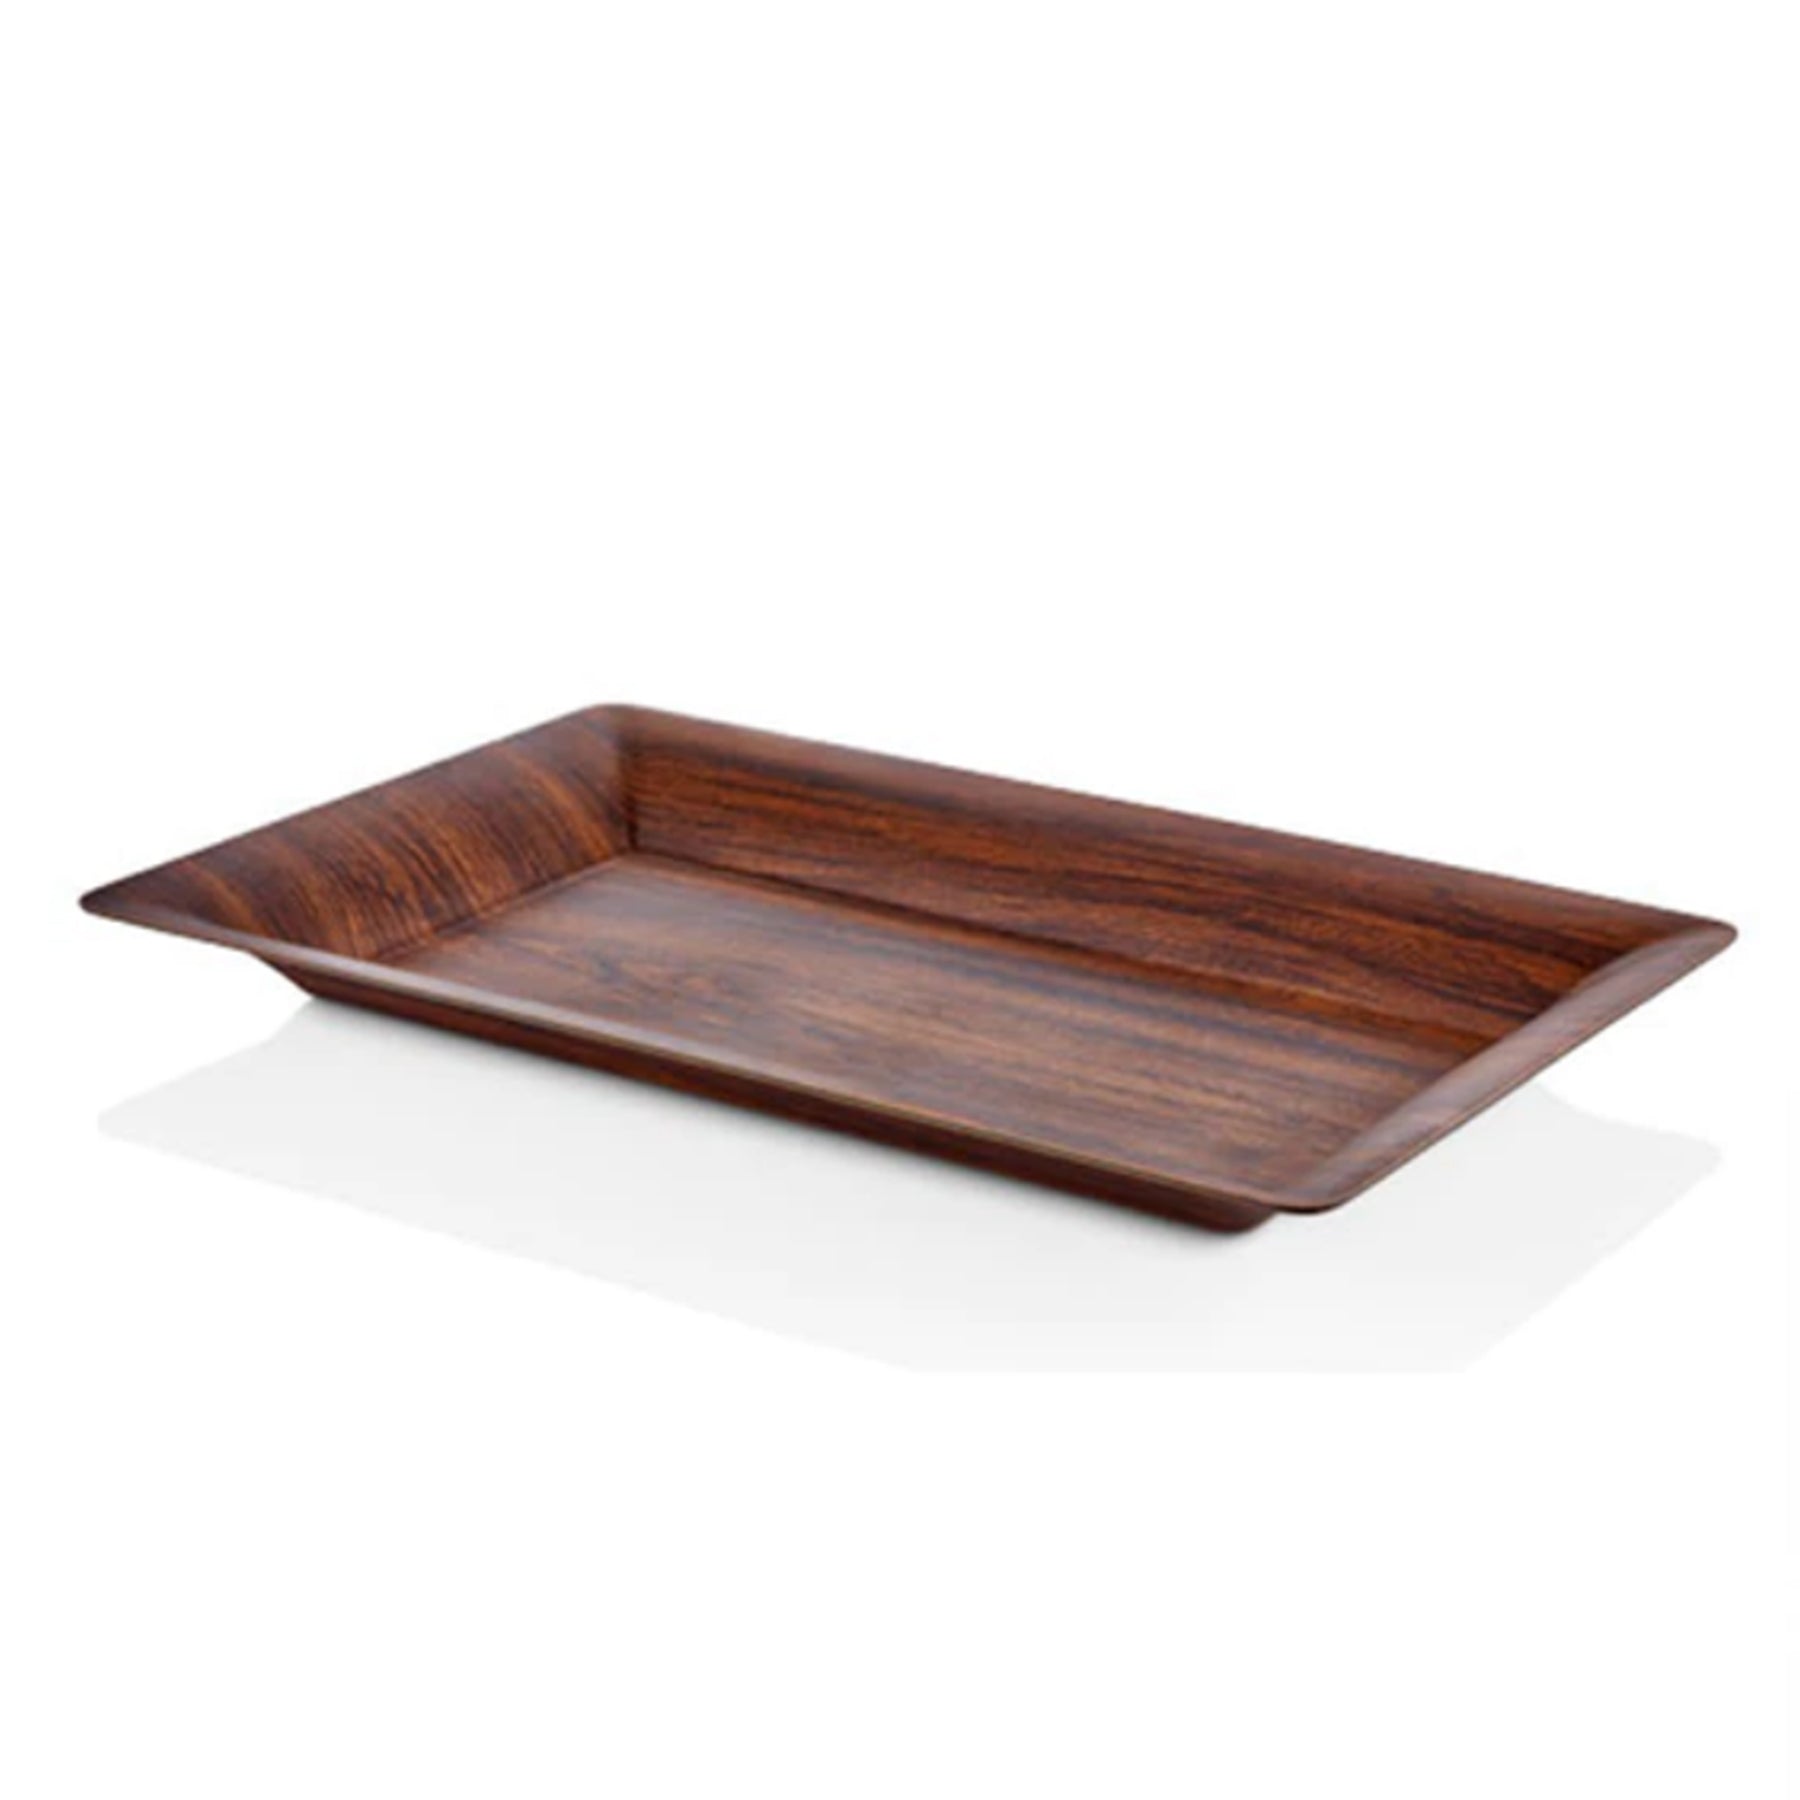 Serving tray, Brown